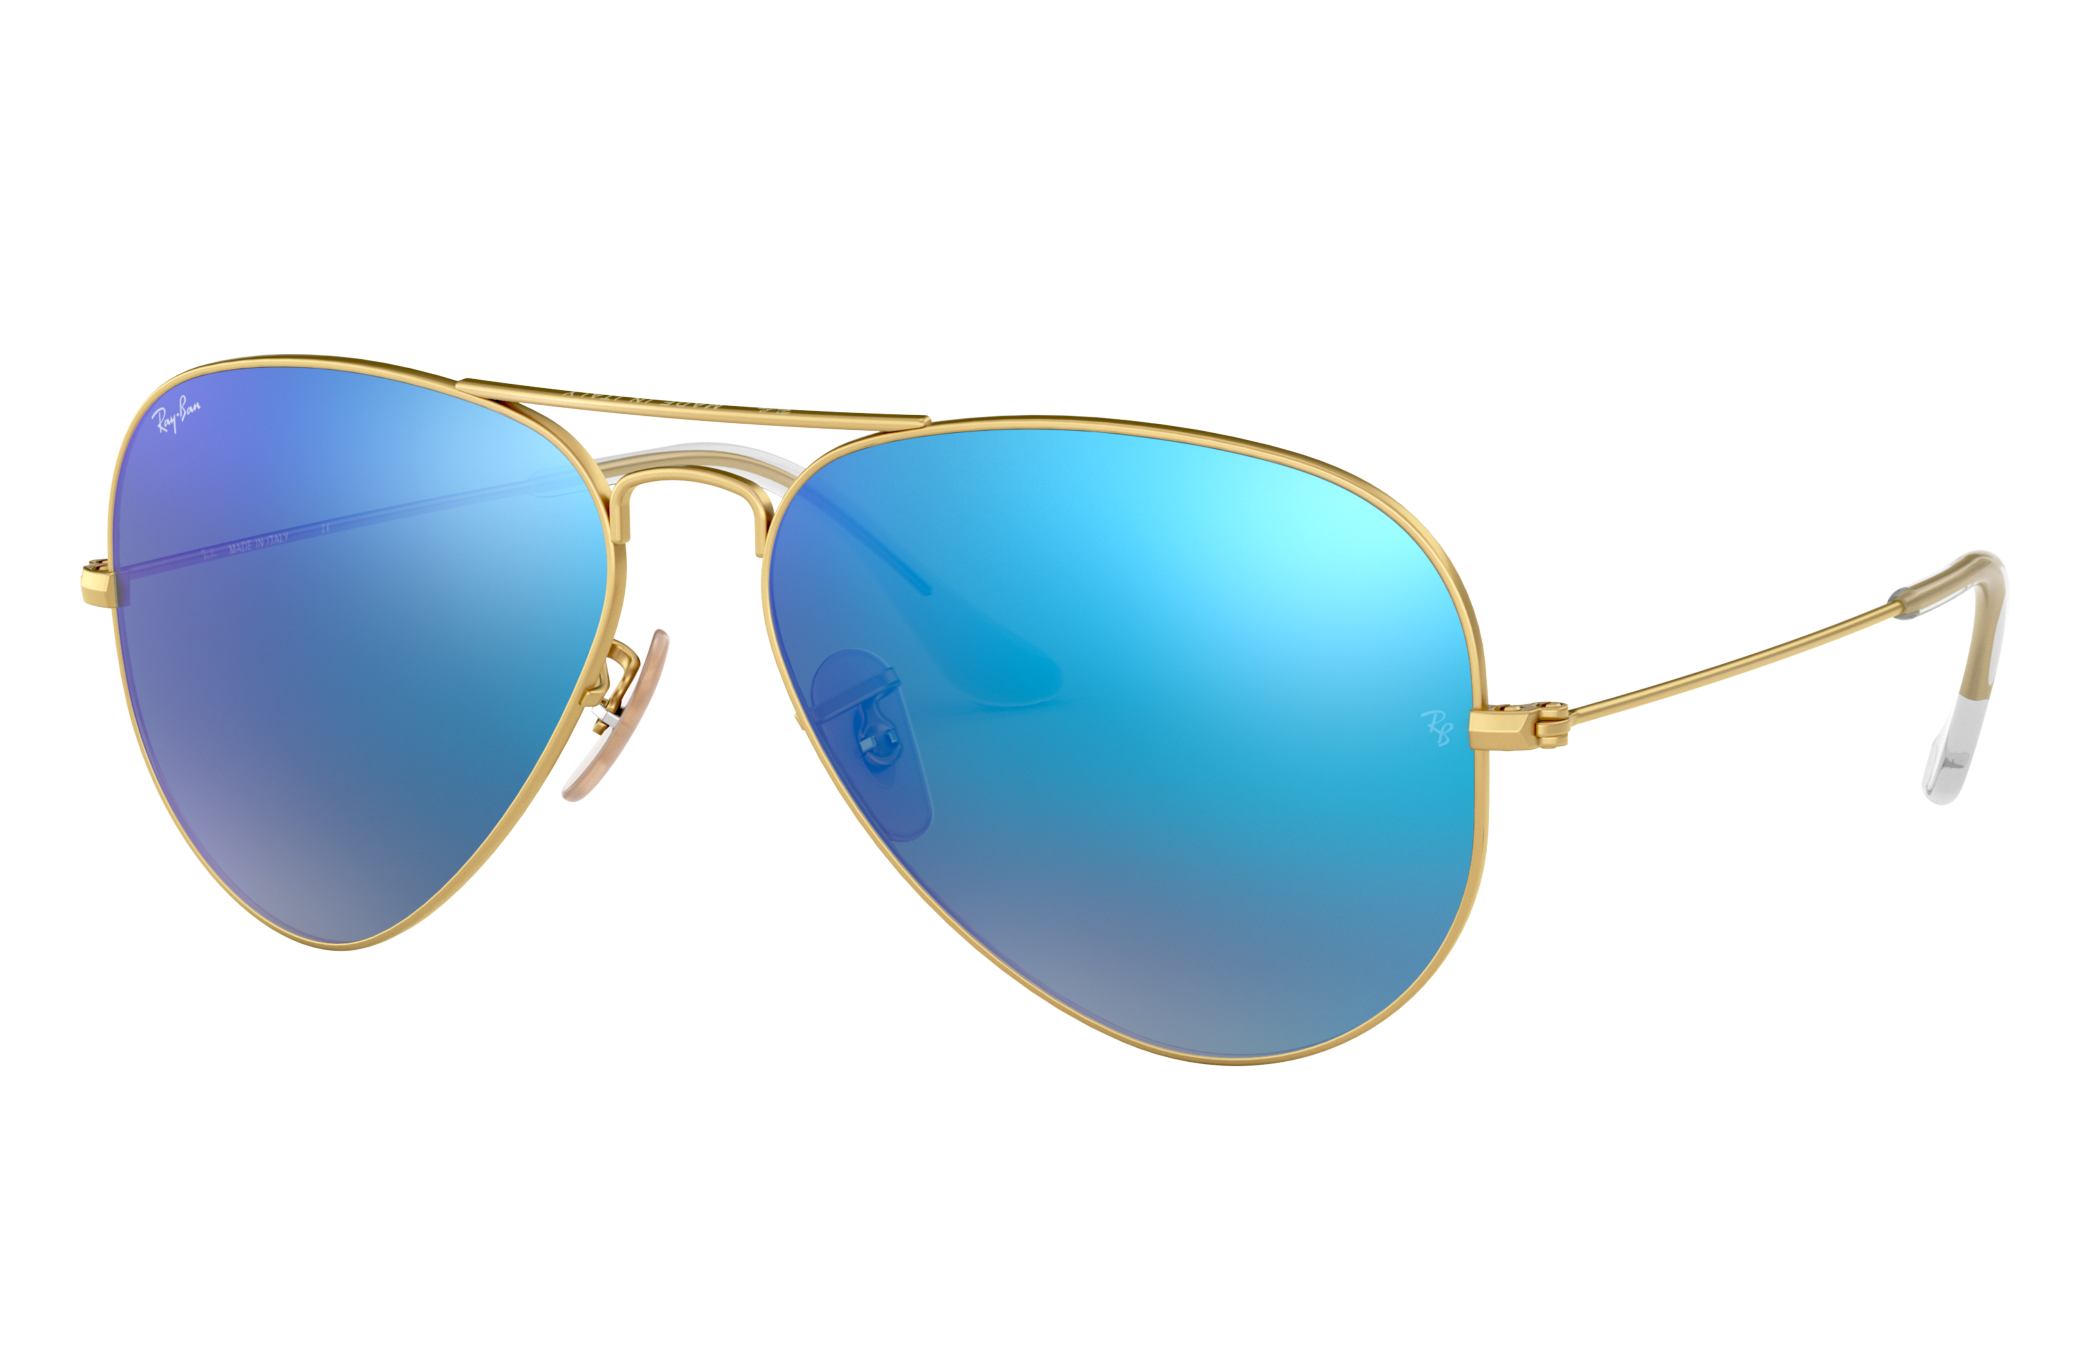 Accessories Sunglasses Aviator Glasses Ray Ban Aviator Glasses gold-colored-blue casual look 